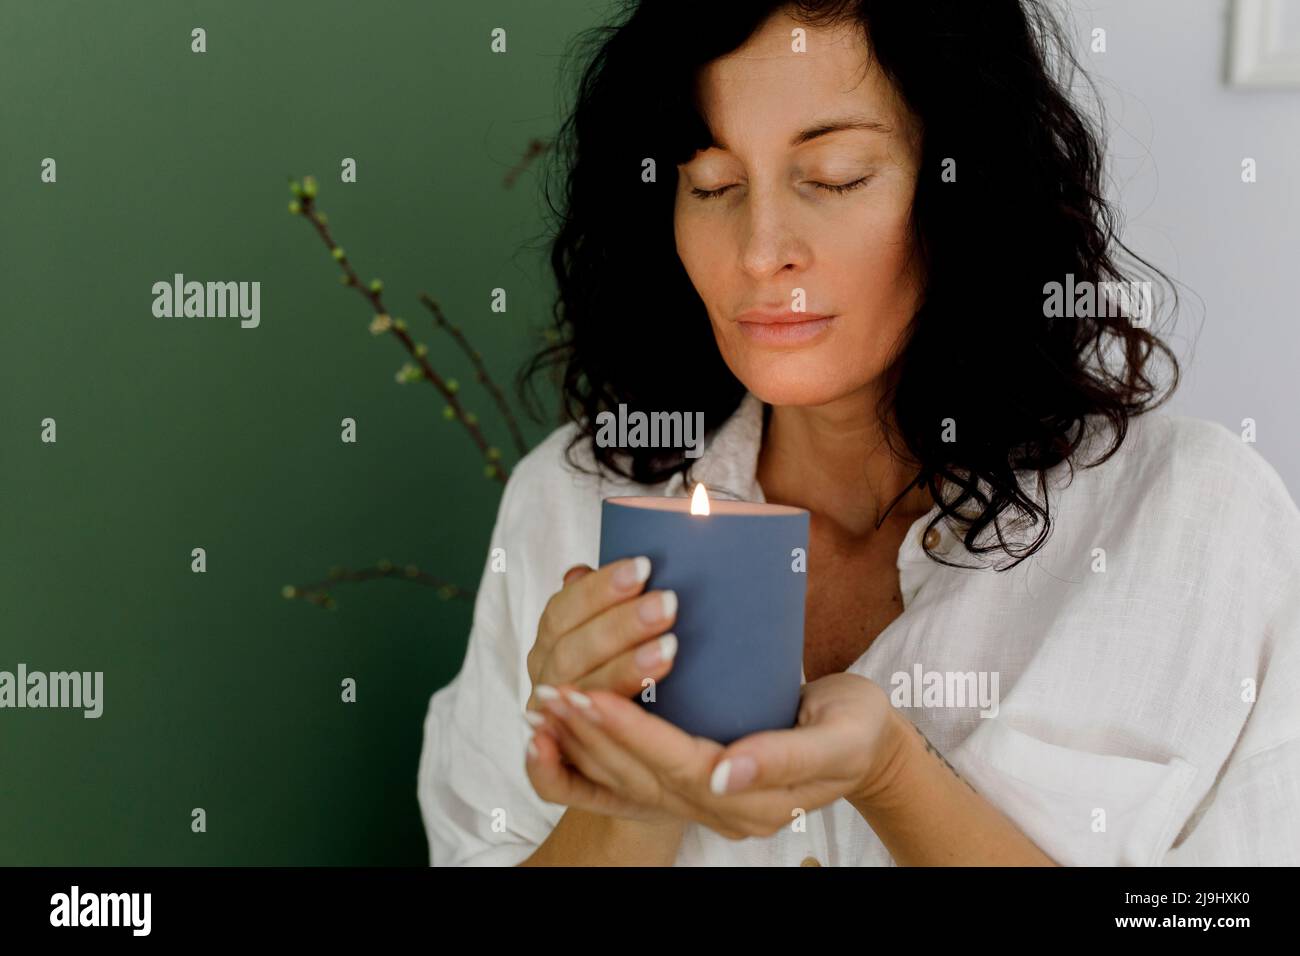 Woman with eyes closed holding candle at home Stock Photo